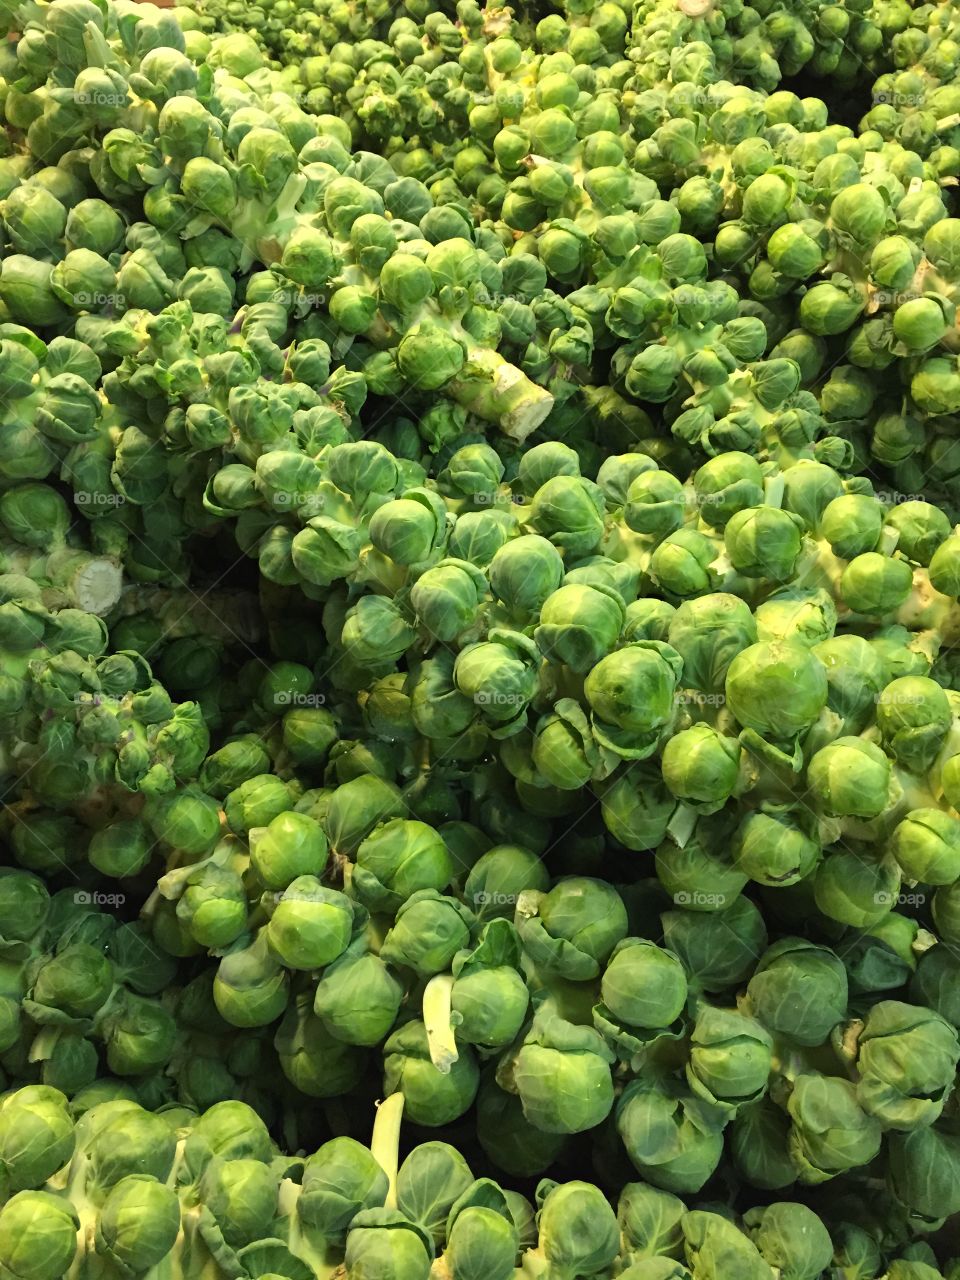 Brussel sprout green. Beautiful bunches of brussels